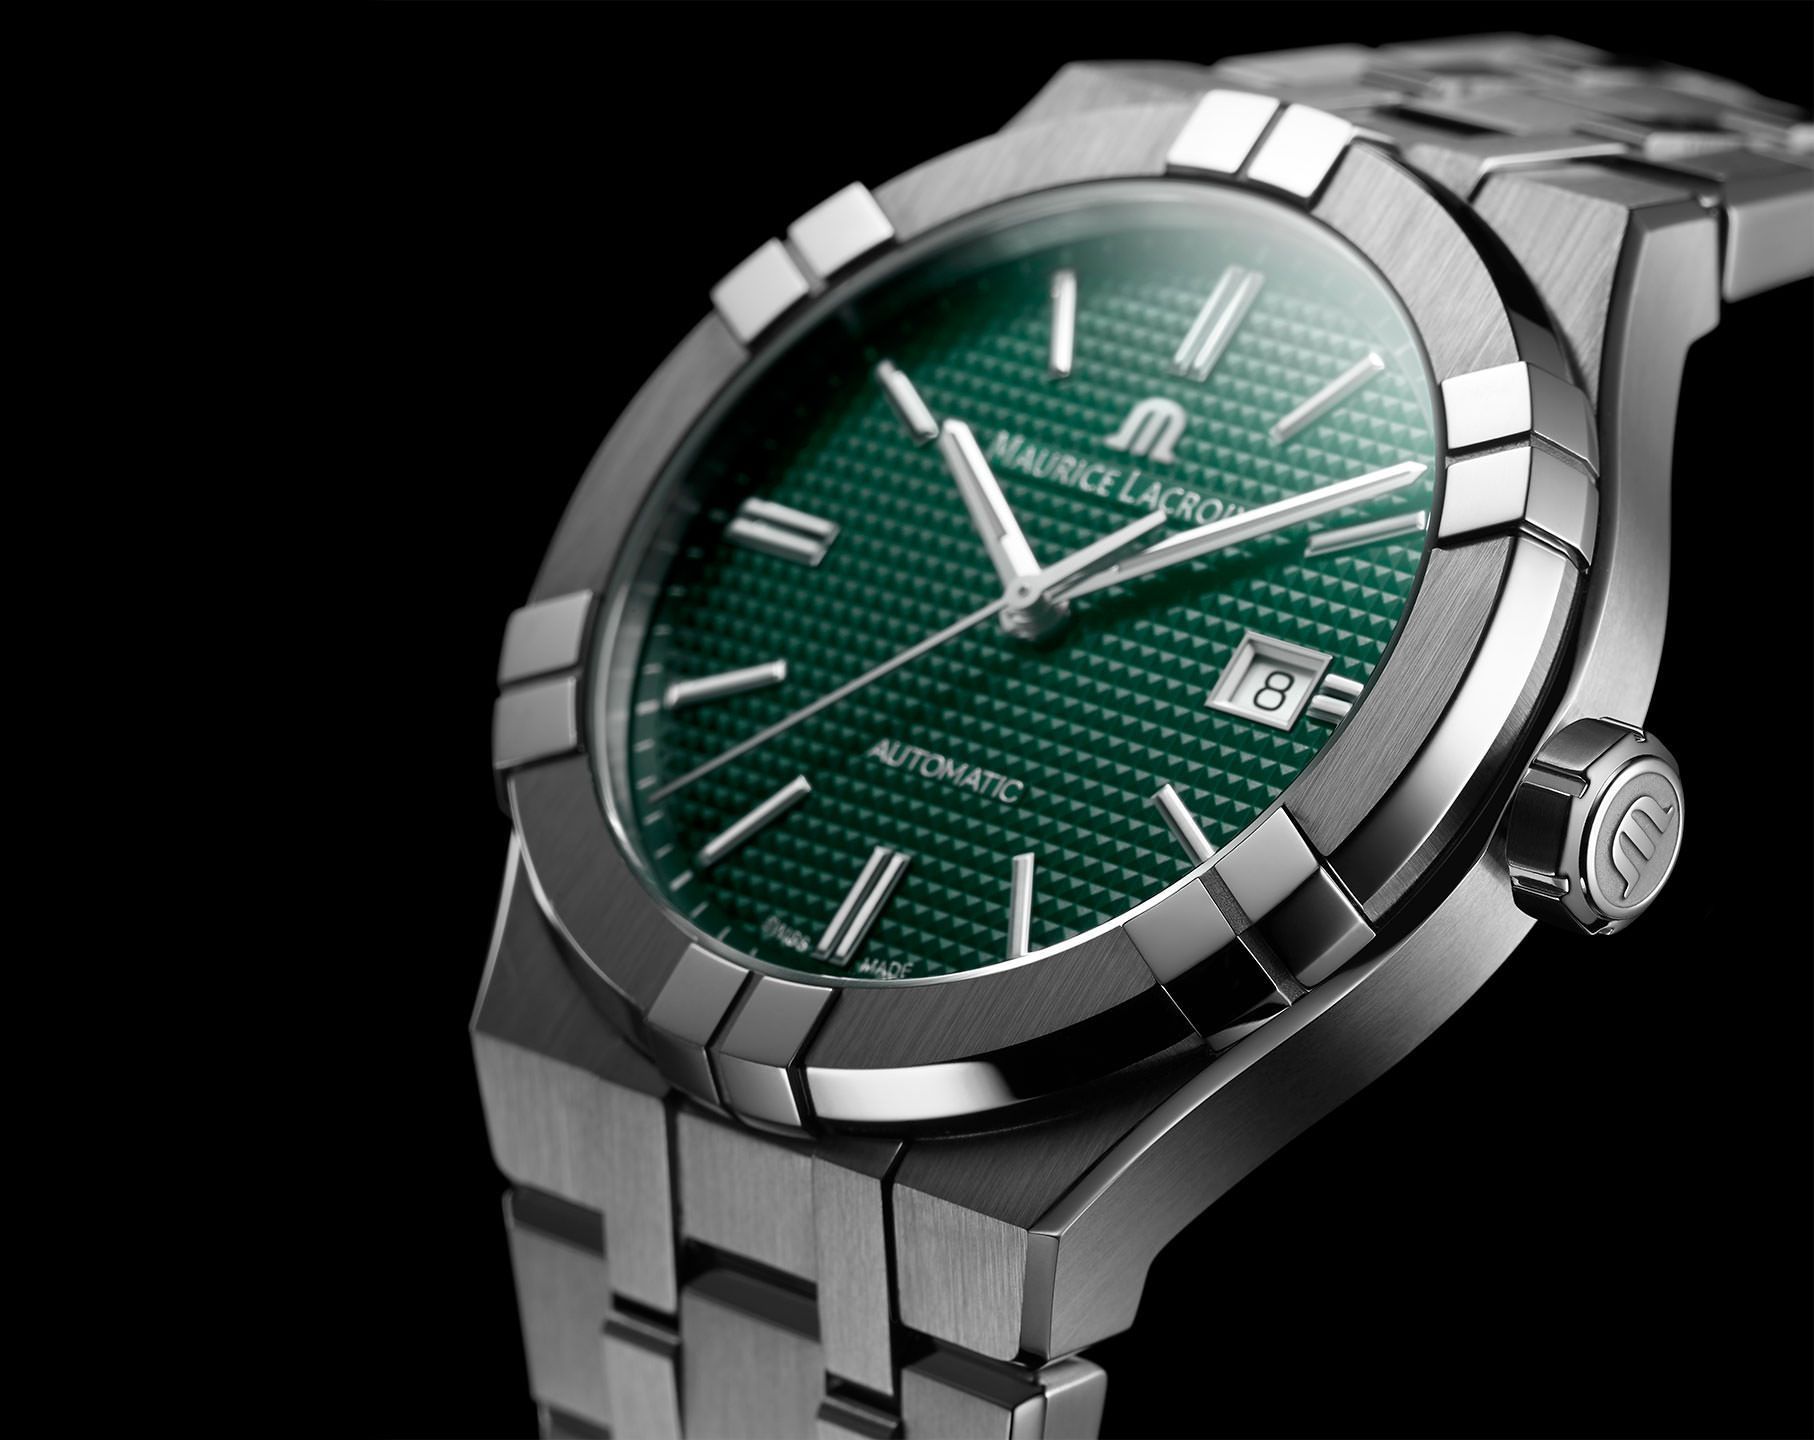 Maurice Lacroix 39 Automatic Watch in Aikon Green mm Dial